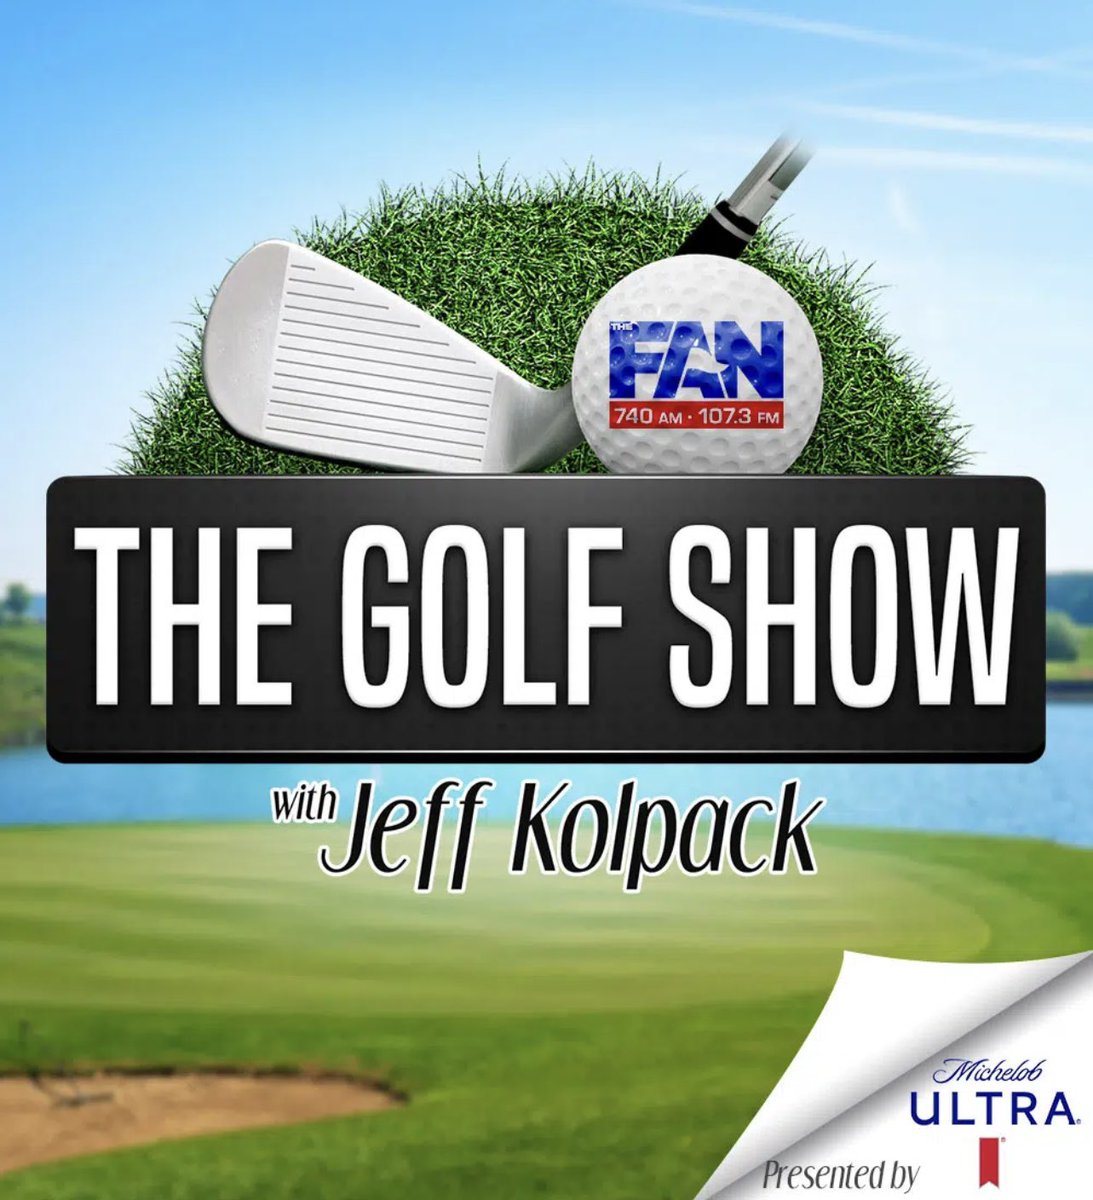 In a half hour, the golf show takes a look at building the MSUM women’s golf program and Mother’s Day gift ideas on 740 The Fan.